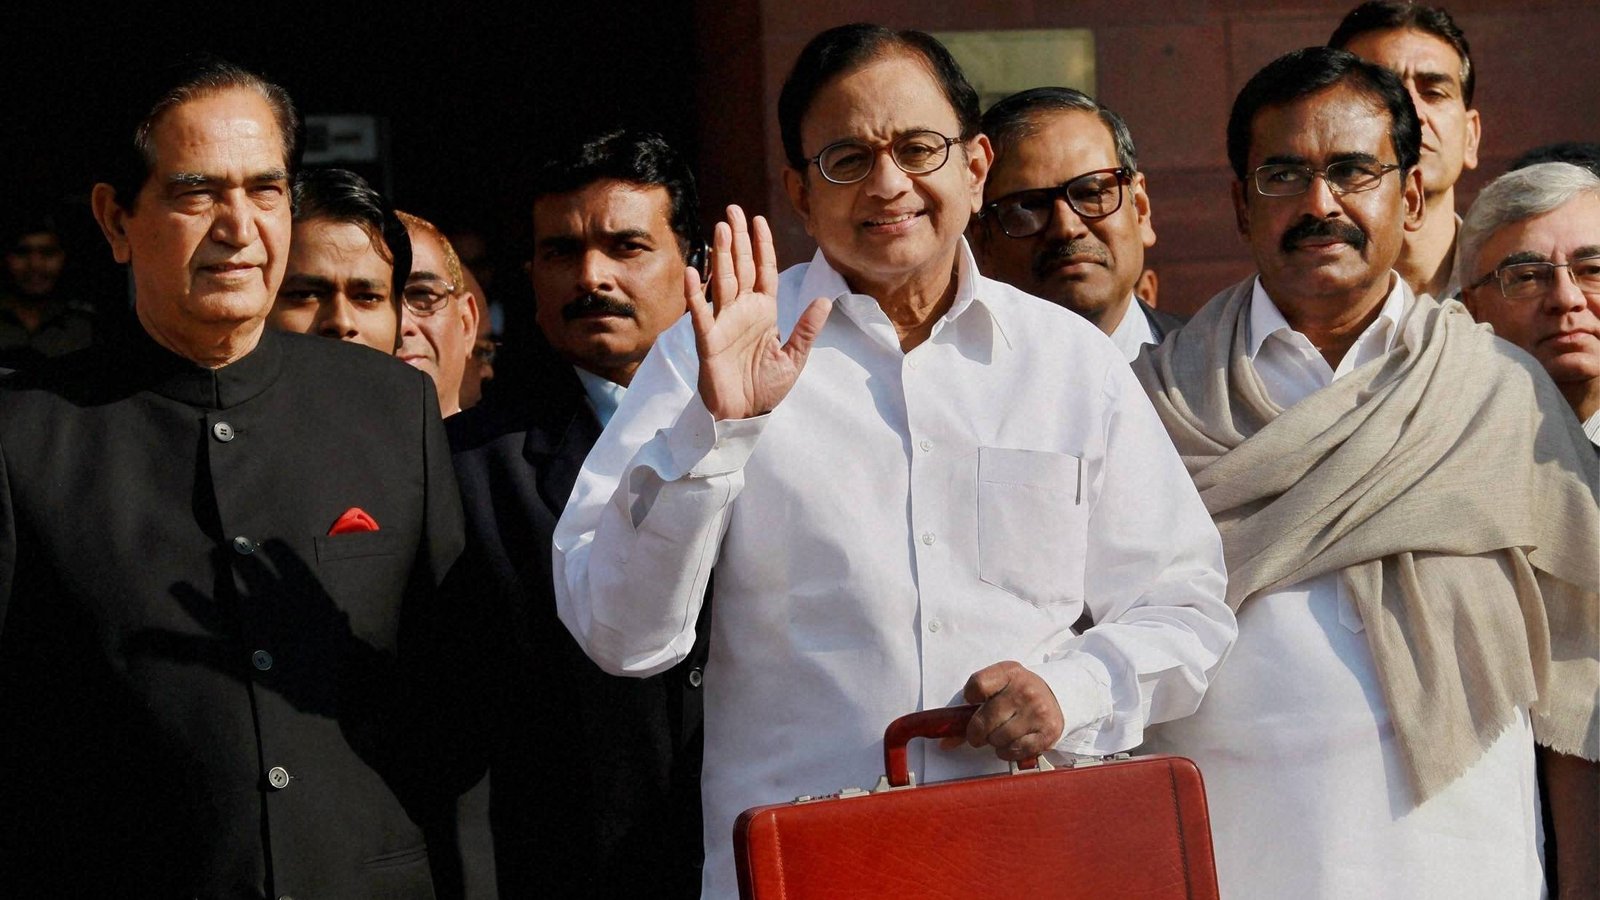 Union Finance Minister P Chidambaram presented his 8th Union Budget and India's 82nd. This is the last Union Budget before the 2014 Lok Sabha elections.